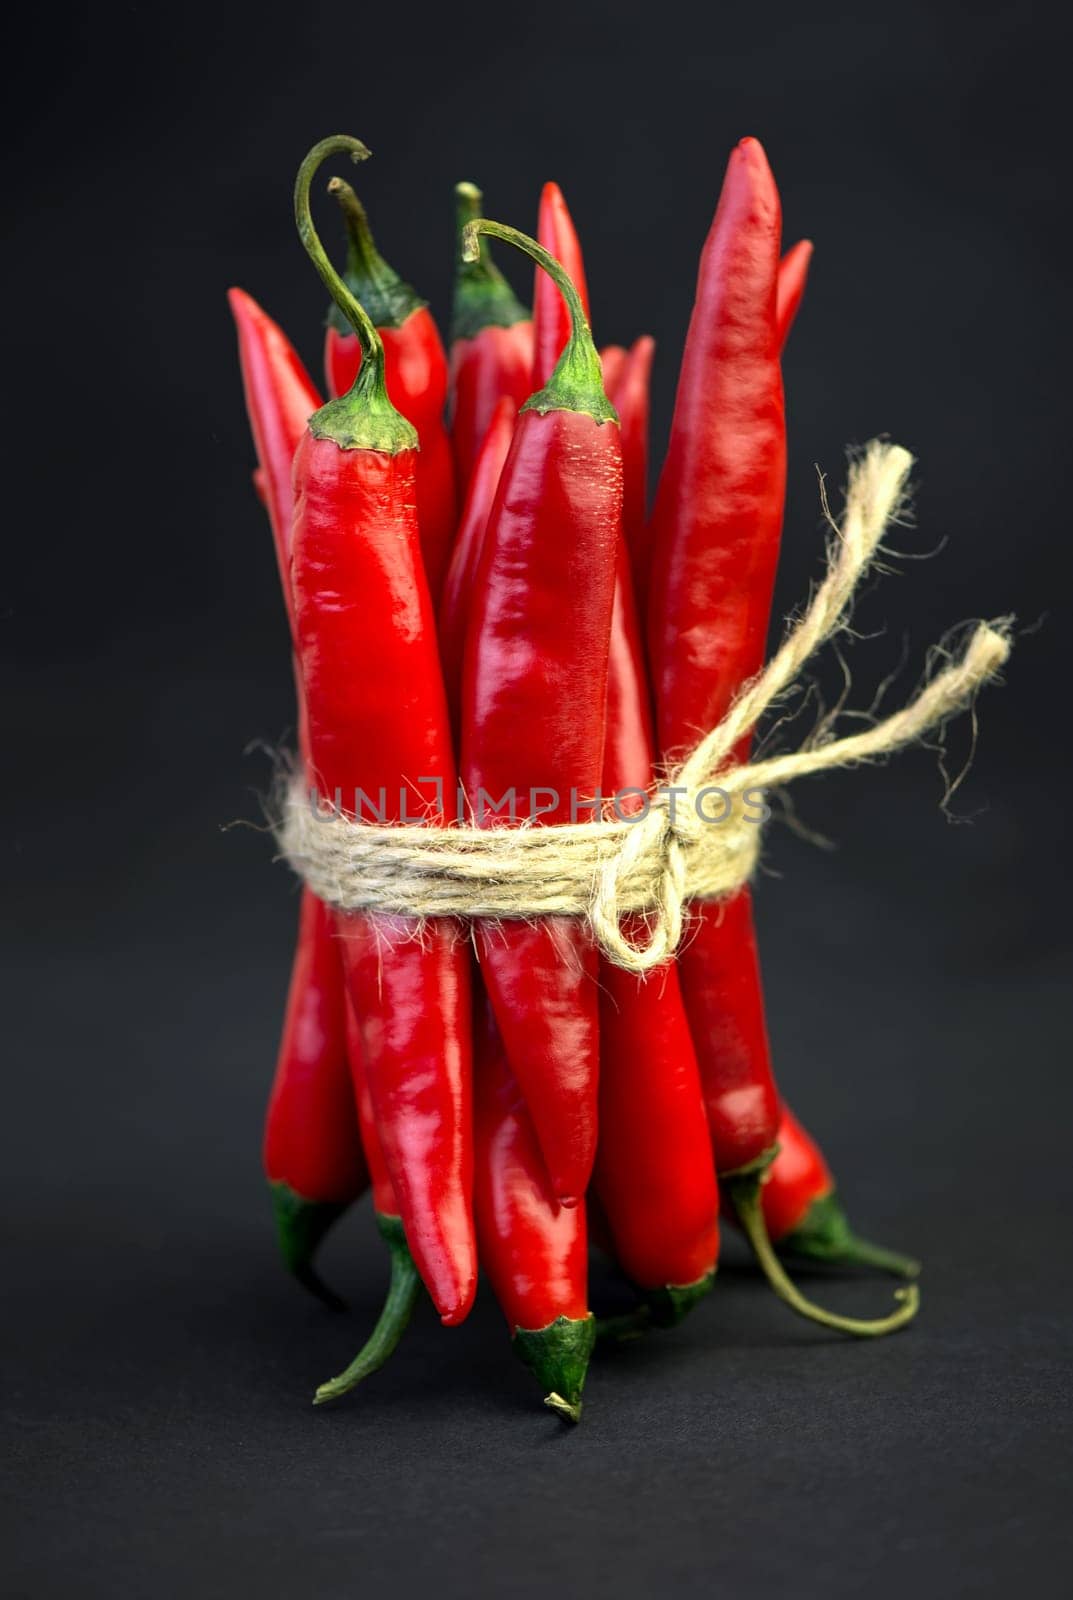 Chili pepper isolated on a black background. Knitted hot chili pepper tied with a rope. Chili hot pepper clipping path by aprilphoto